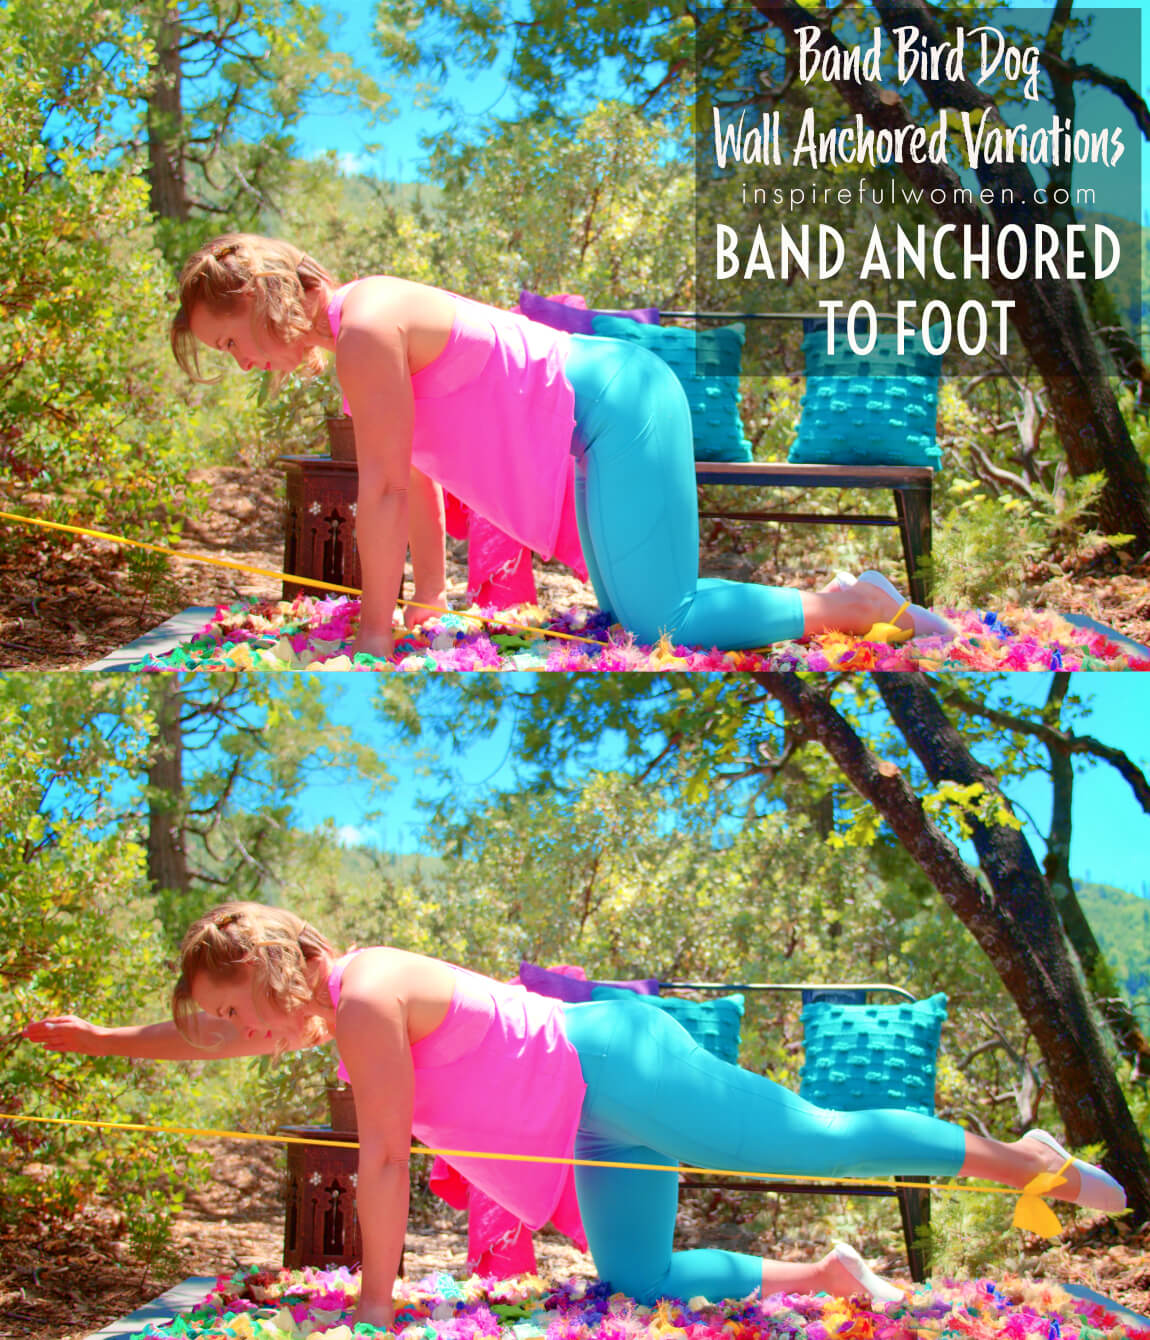 band-anchored-to-foot-bird-dog-wall-anchored-resistance-band-back-extensor-home-core-exercise-variation